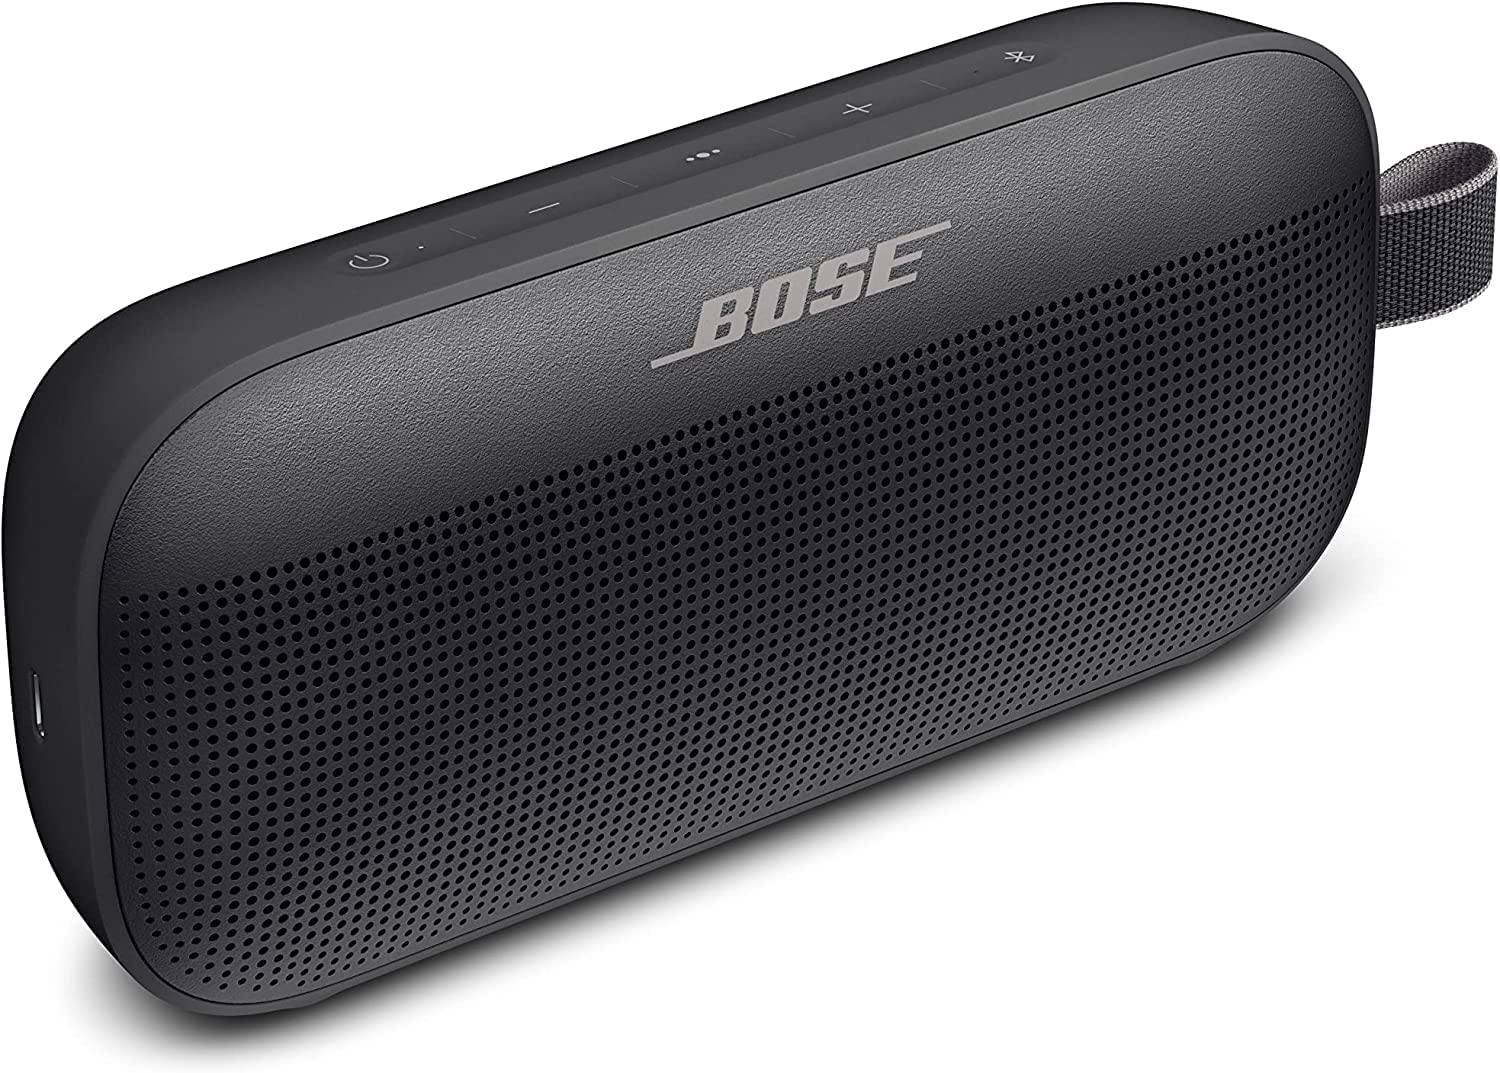 Deal Alert! Bose Portable Bluetooth Speakers Are on Sale For Prime Day